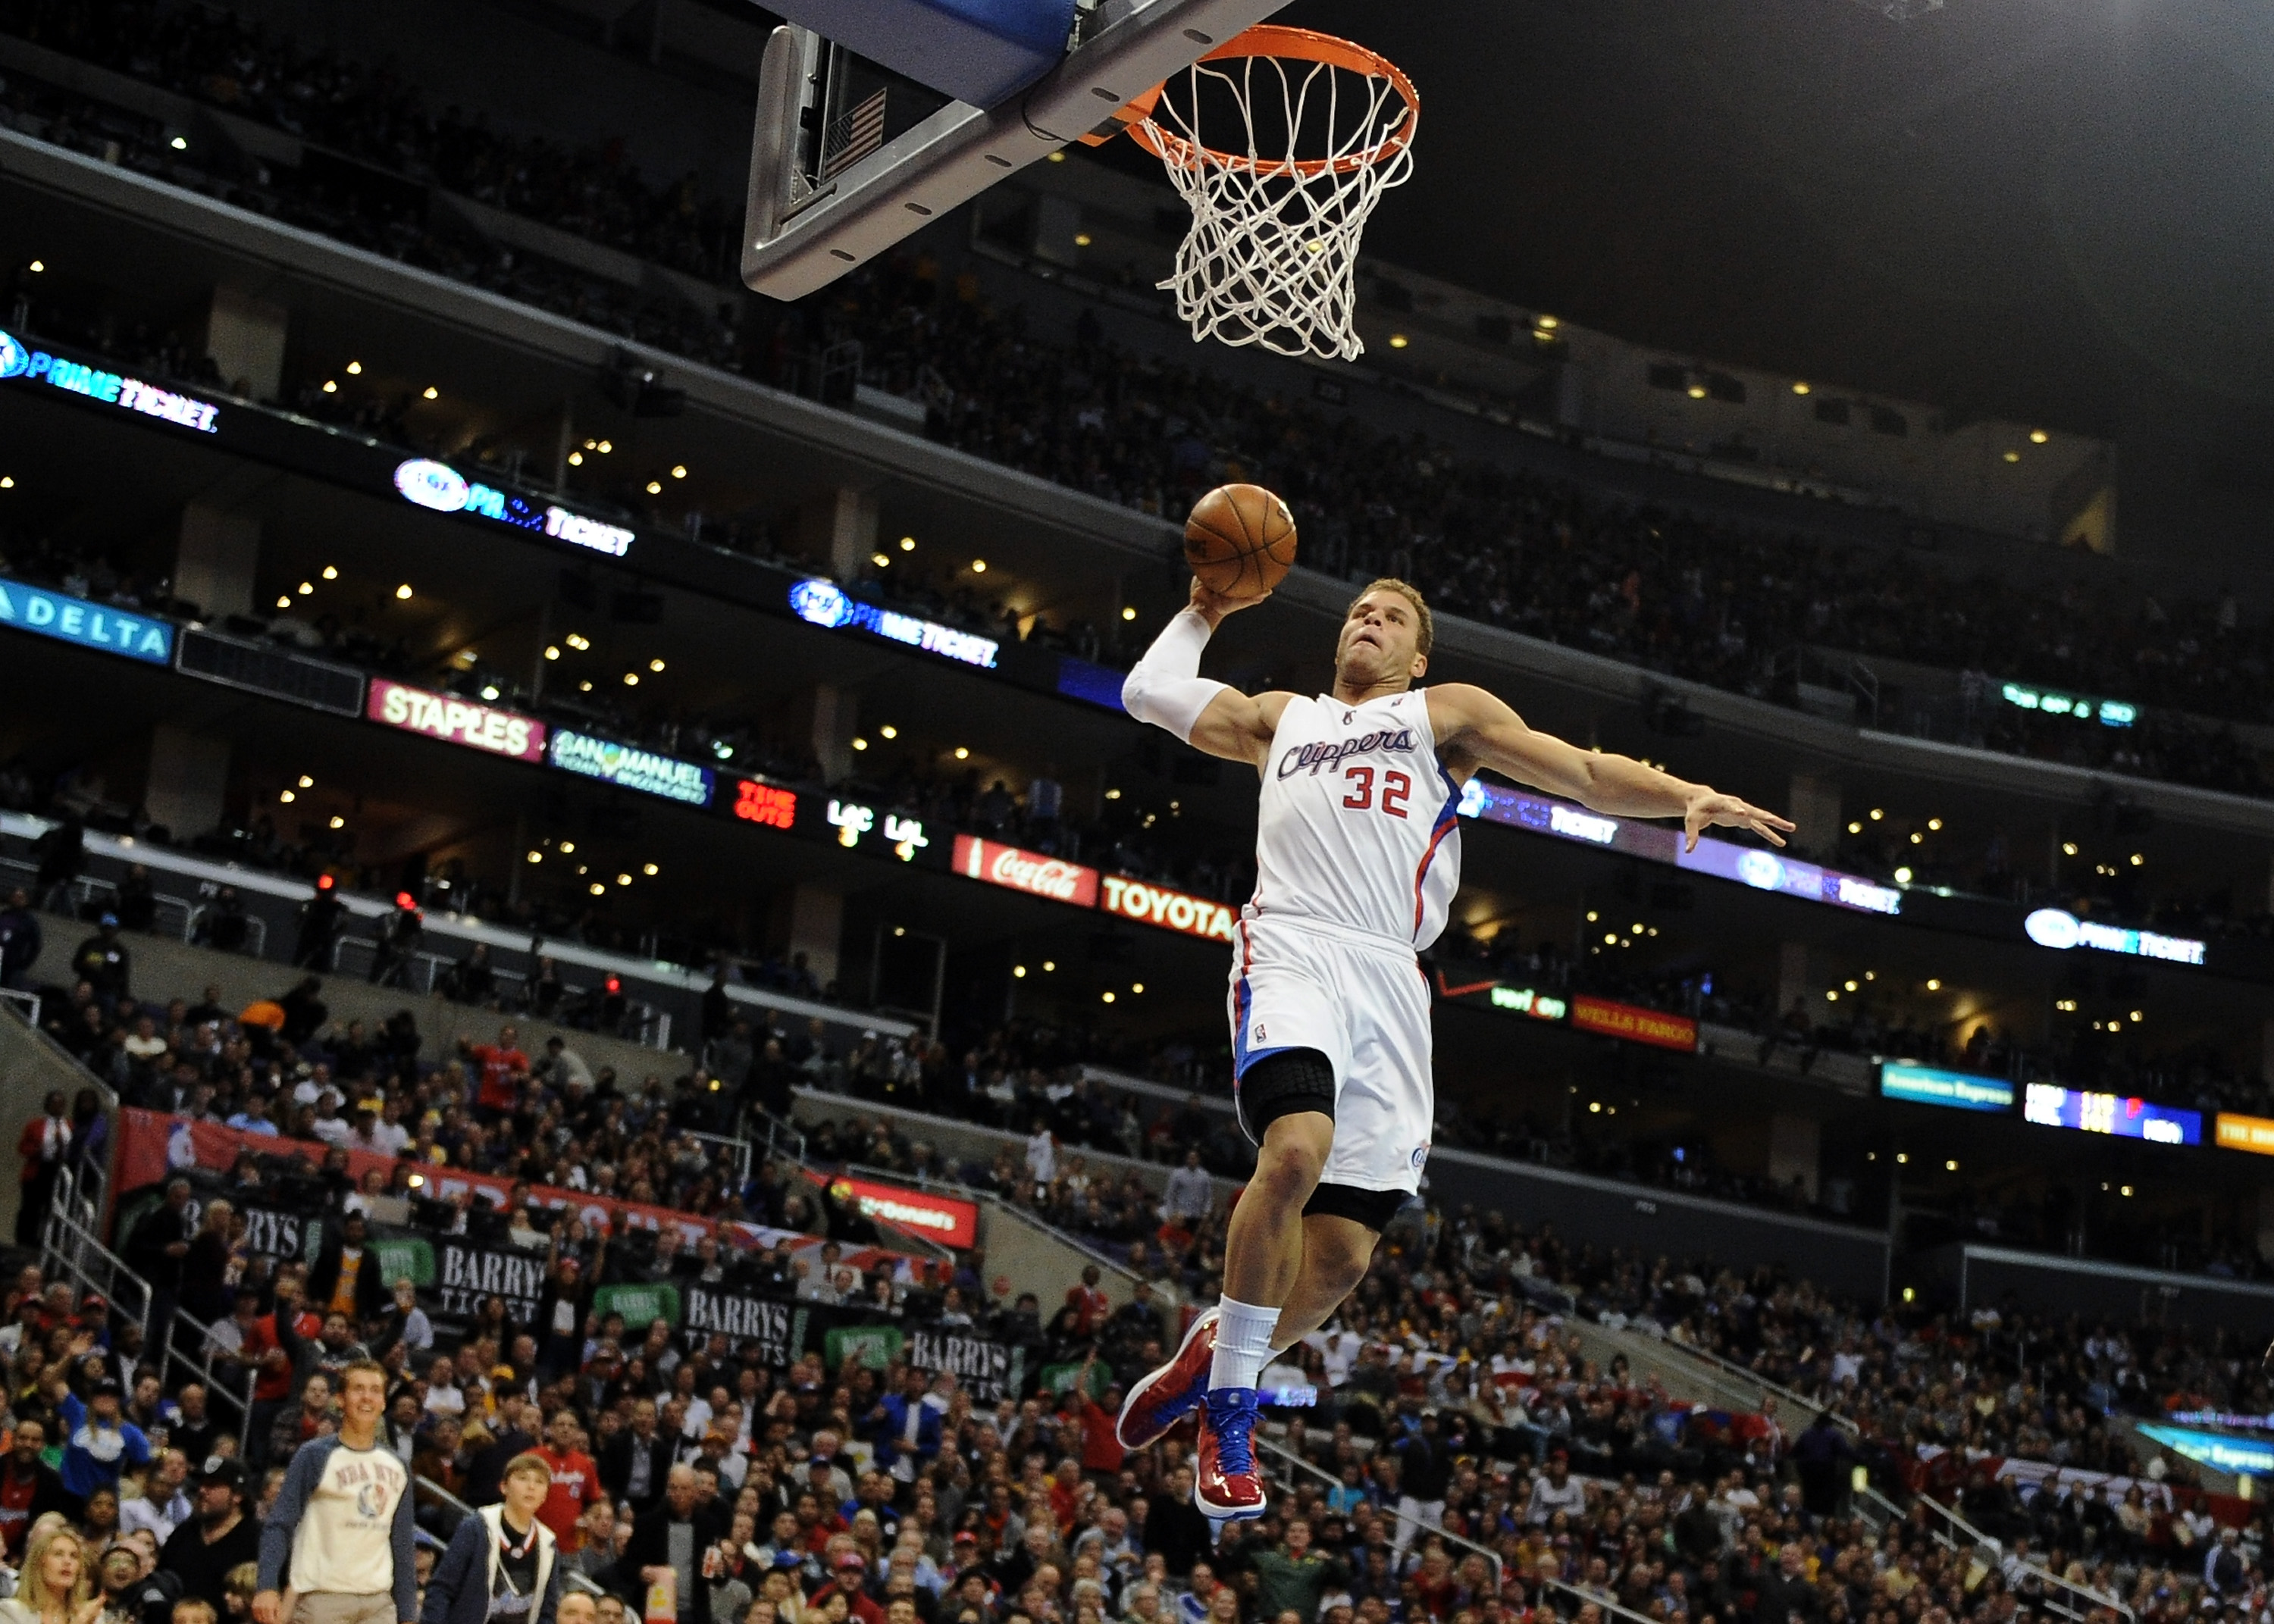 Blake Griffin has been known for his insane athleticism over the years. His talent has ultimately helped him rack up a massive net worth.